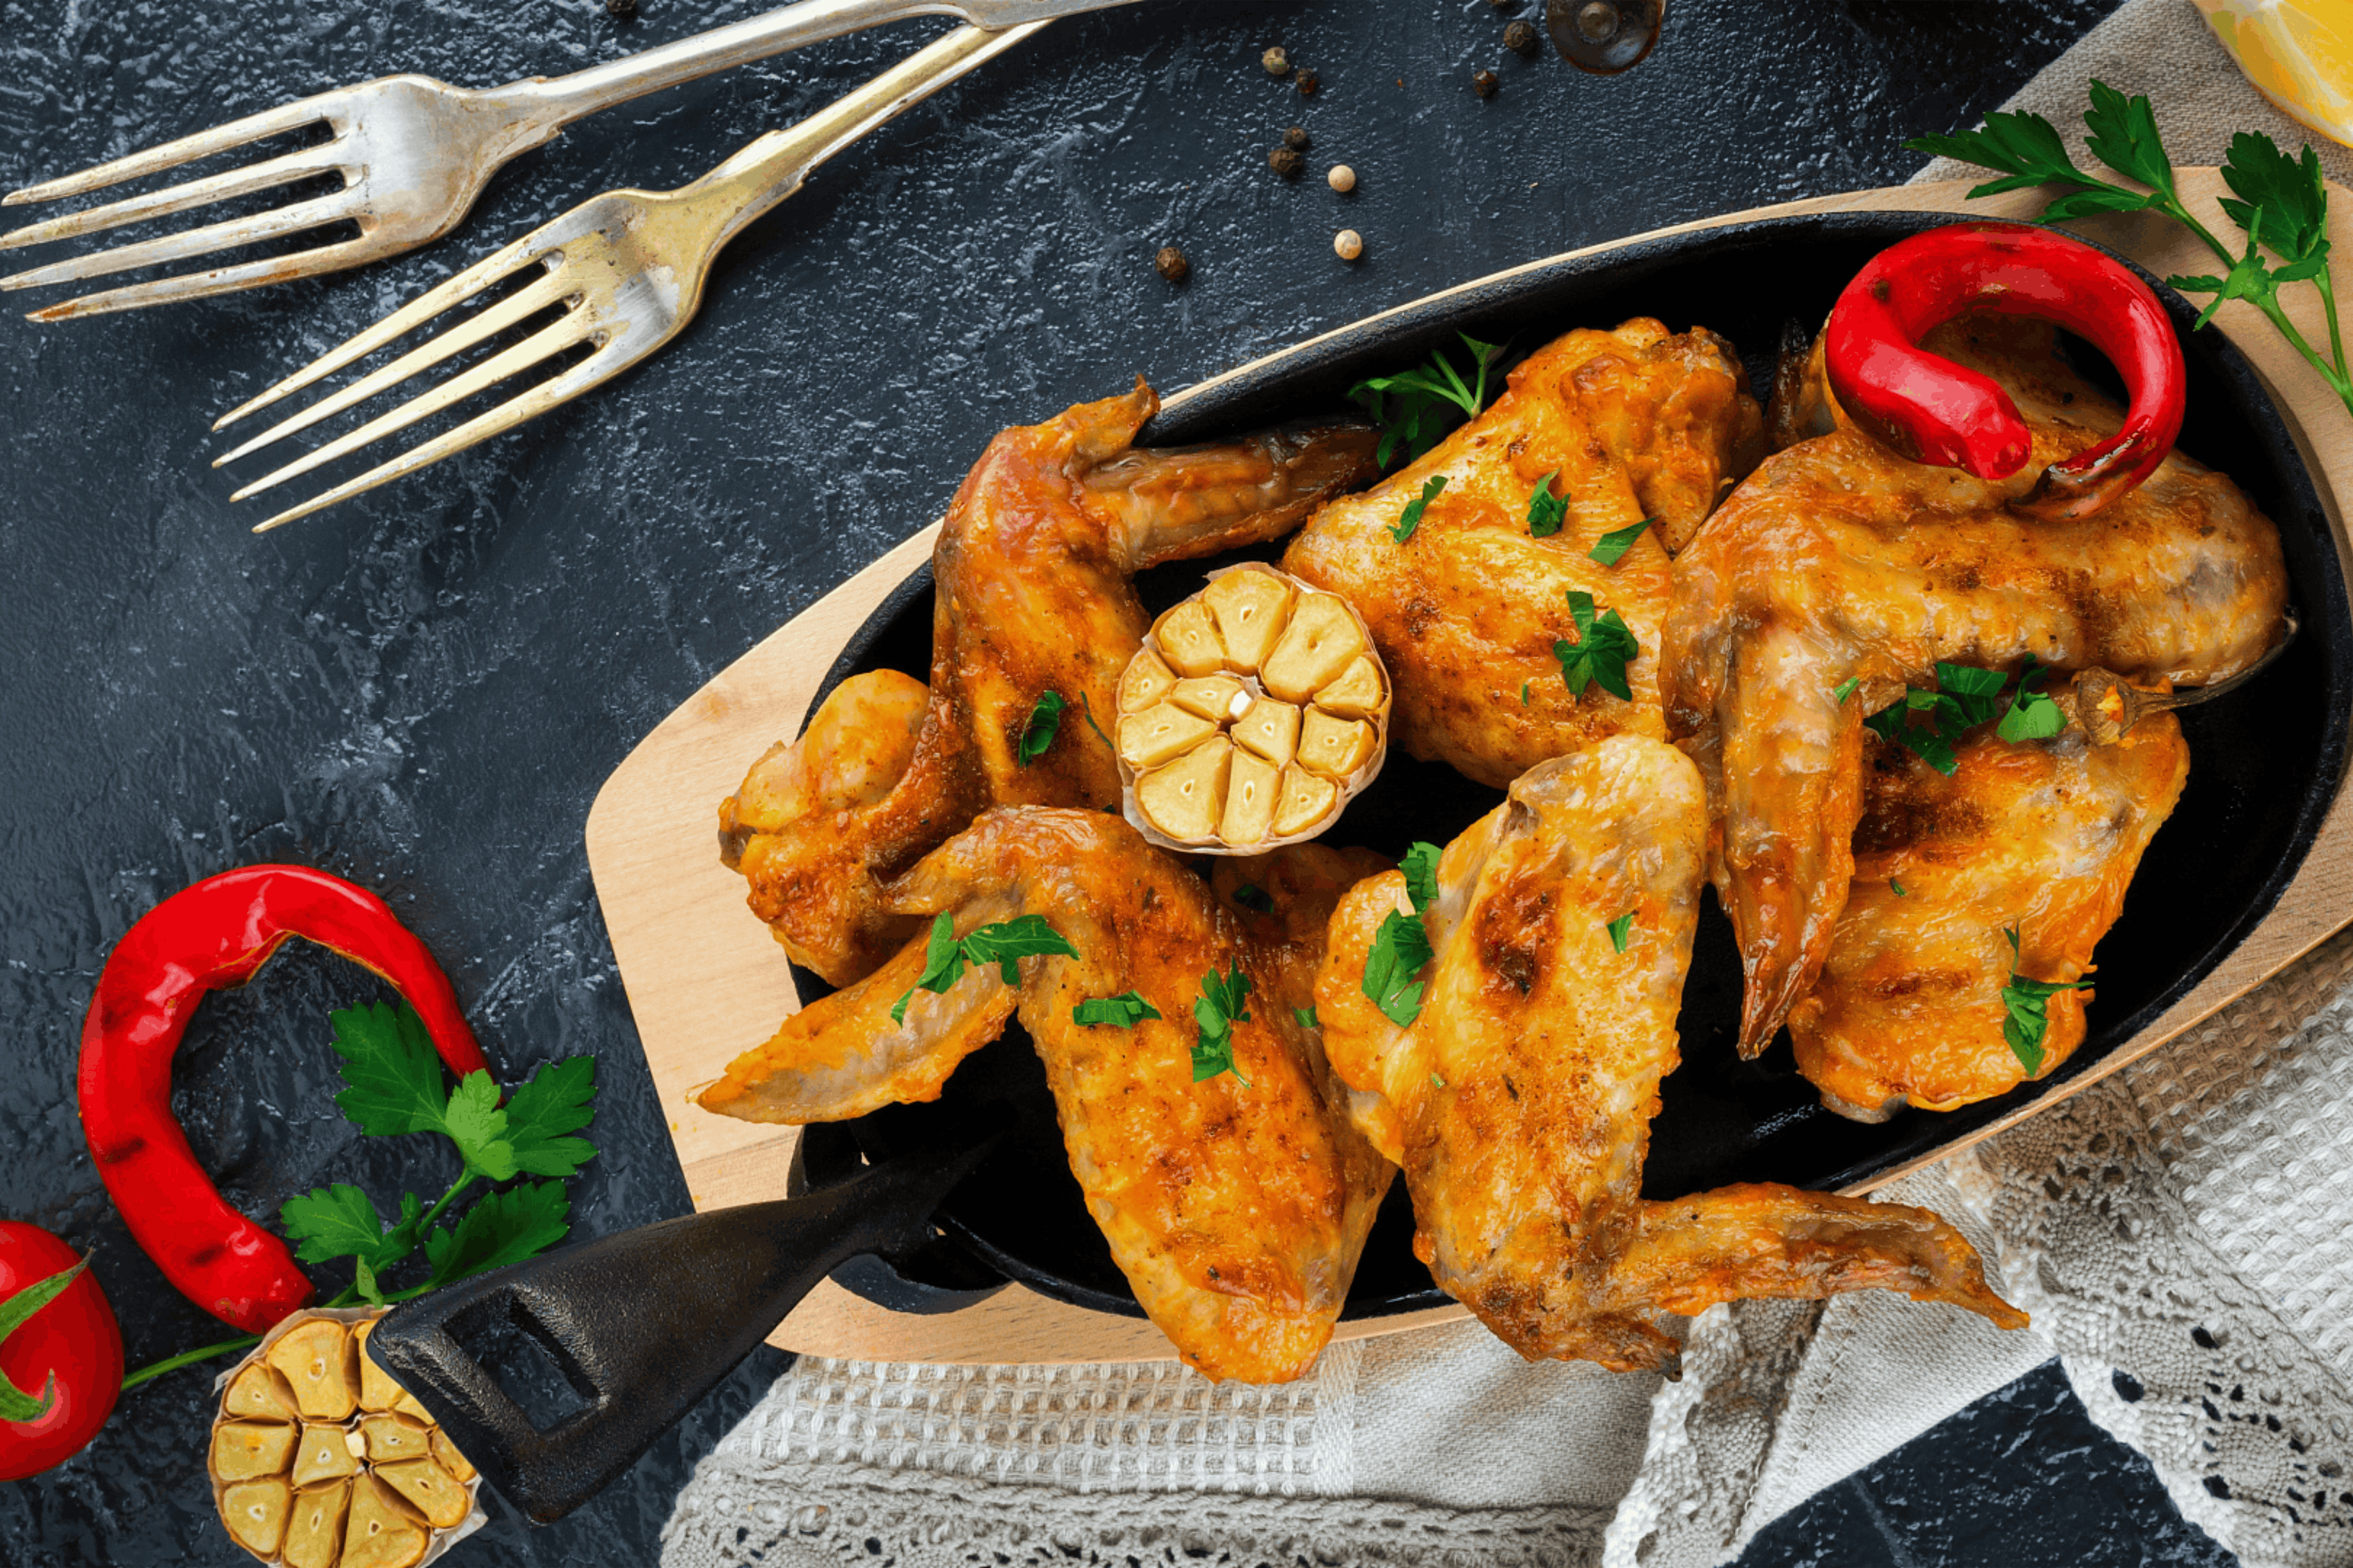 Chicken wings are a classic choice for parties and gatherings and are always a hit on the grill. With the X&E Smokeless Grill, you can enjoy perfectly cooked wings without any smoke or mess.